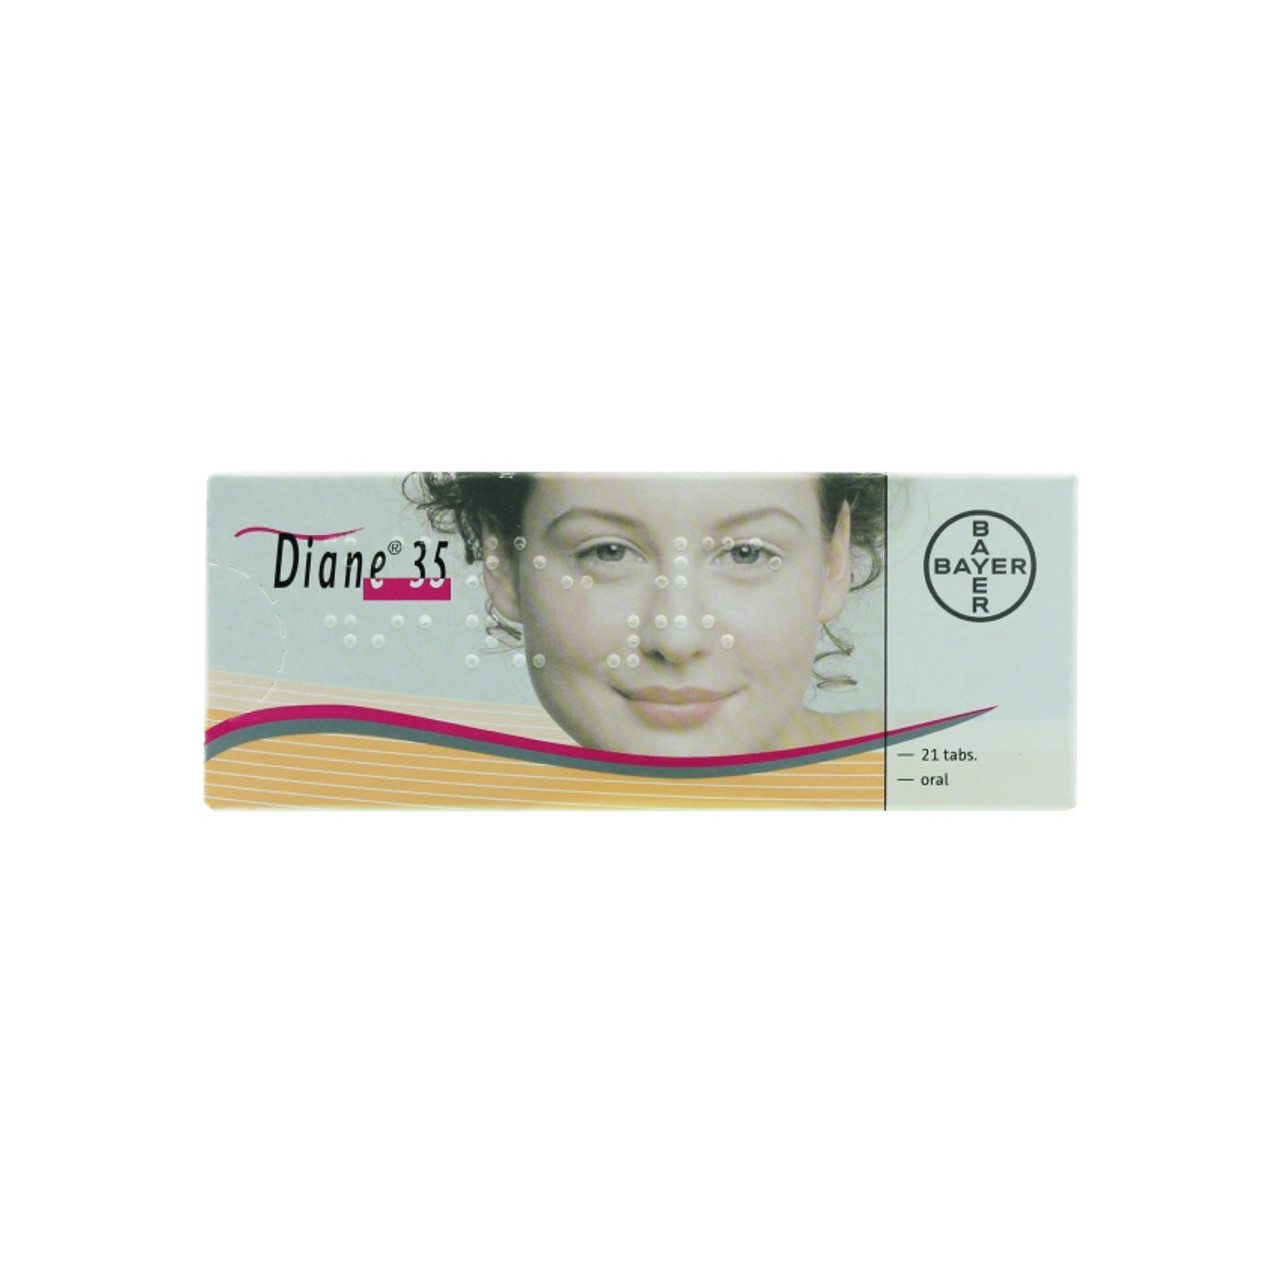 Buy Diane 35 Tab 21S Online at Best Price & Same Day Delivery at 